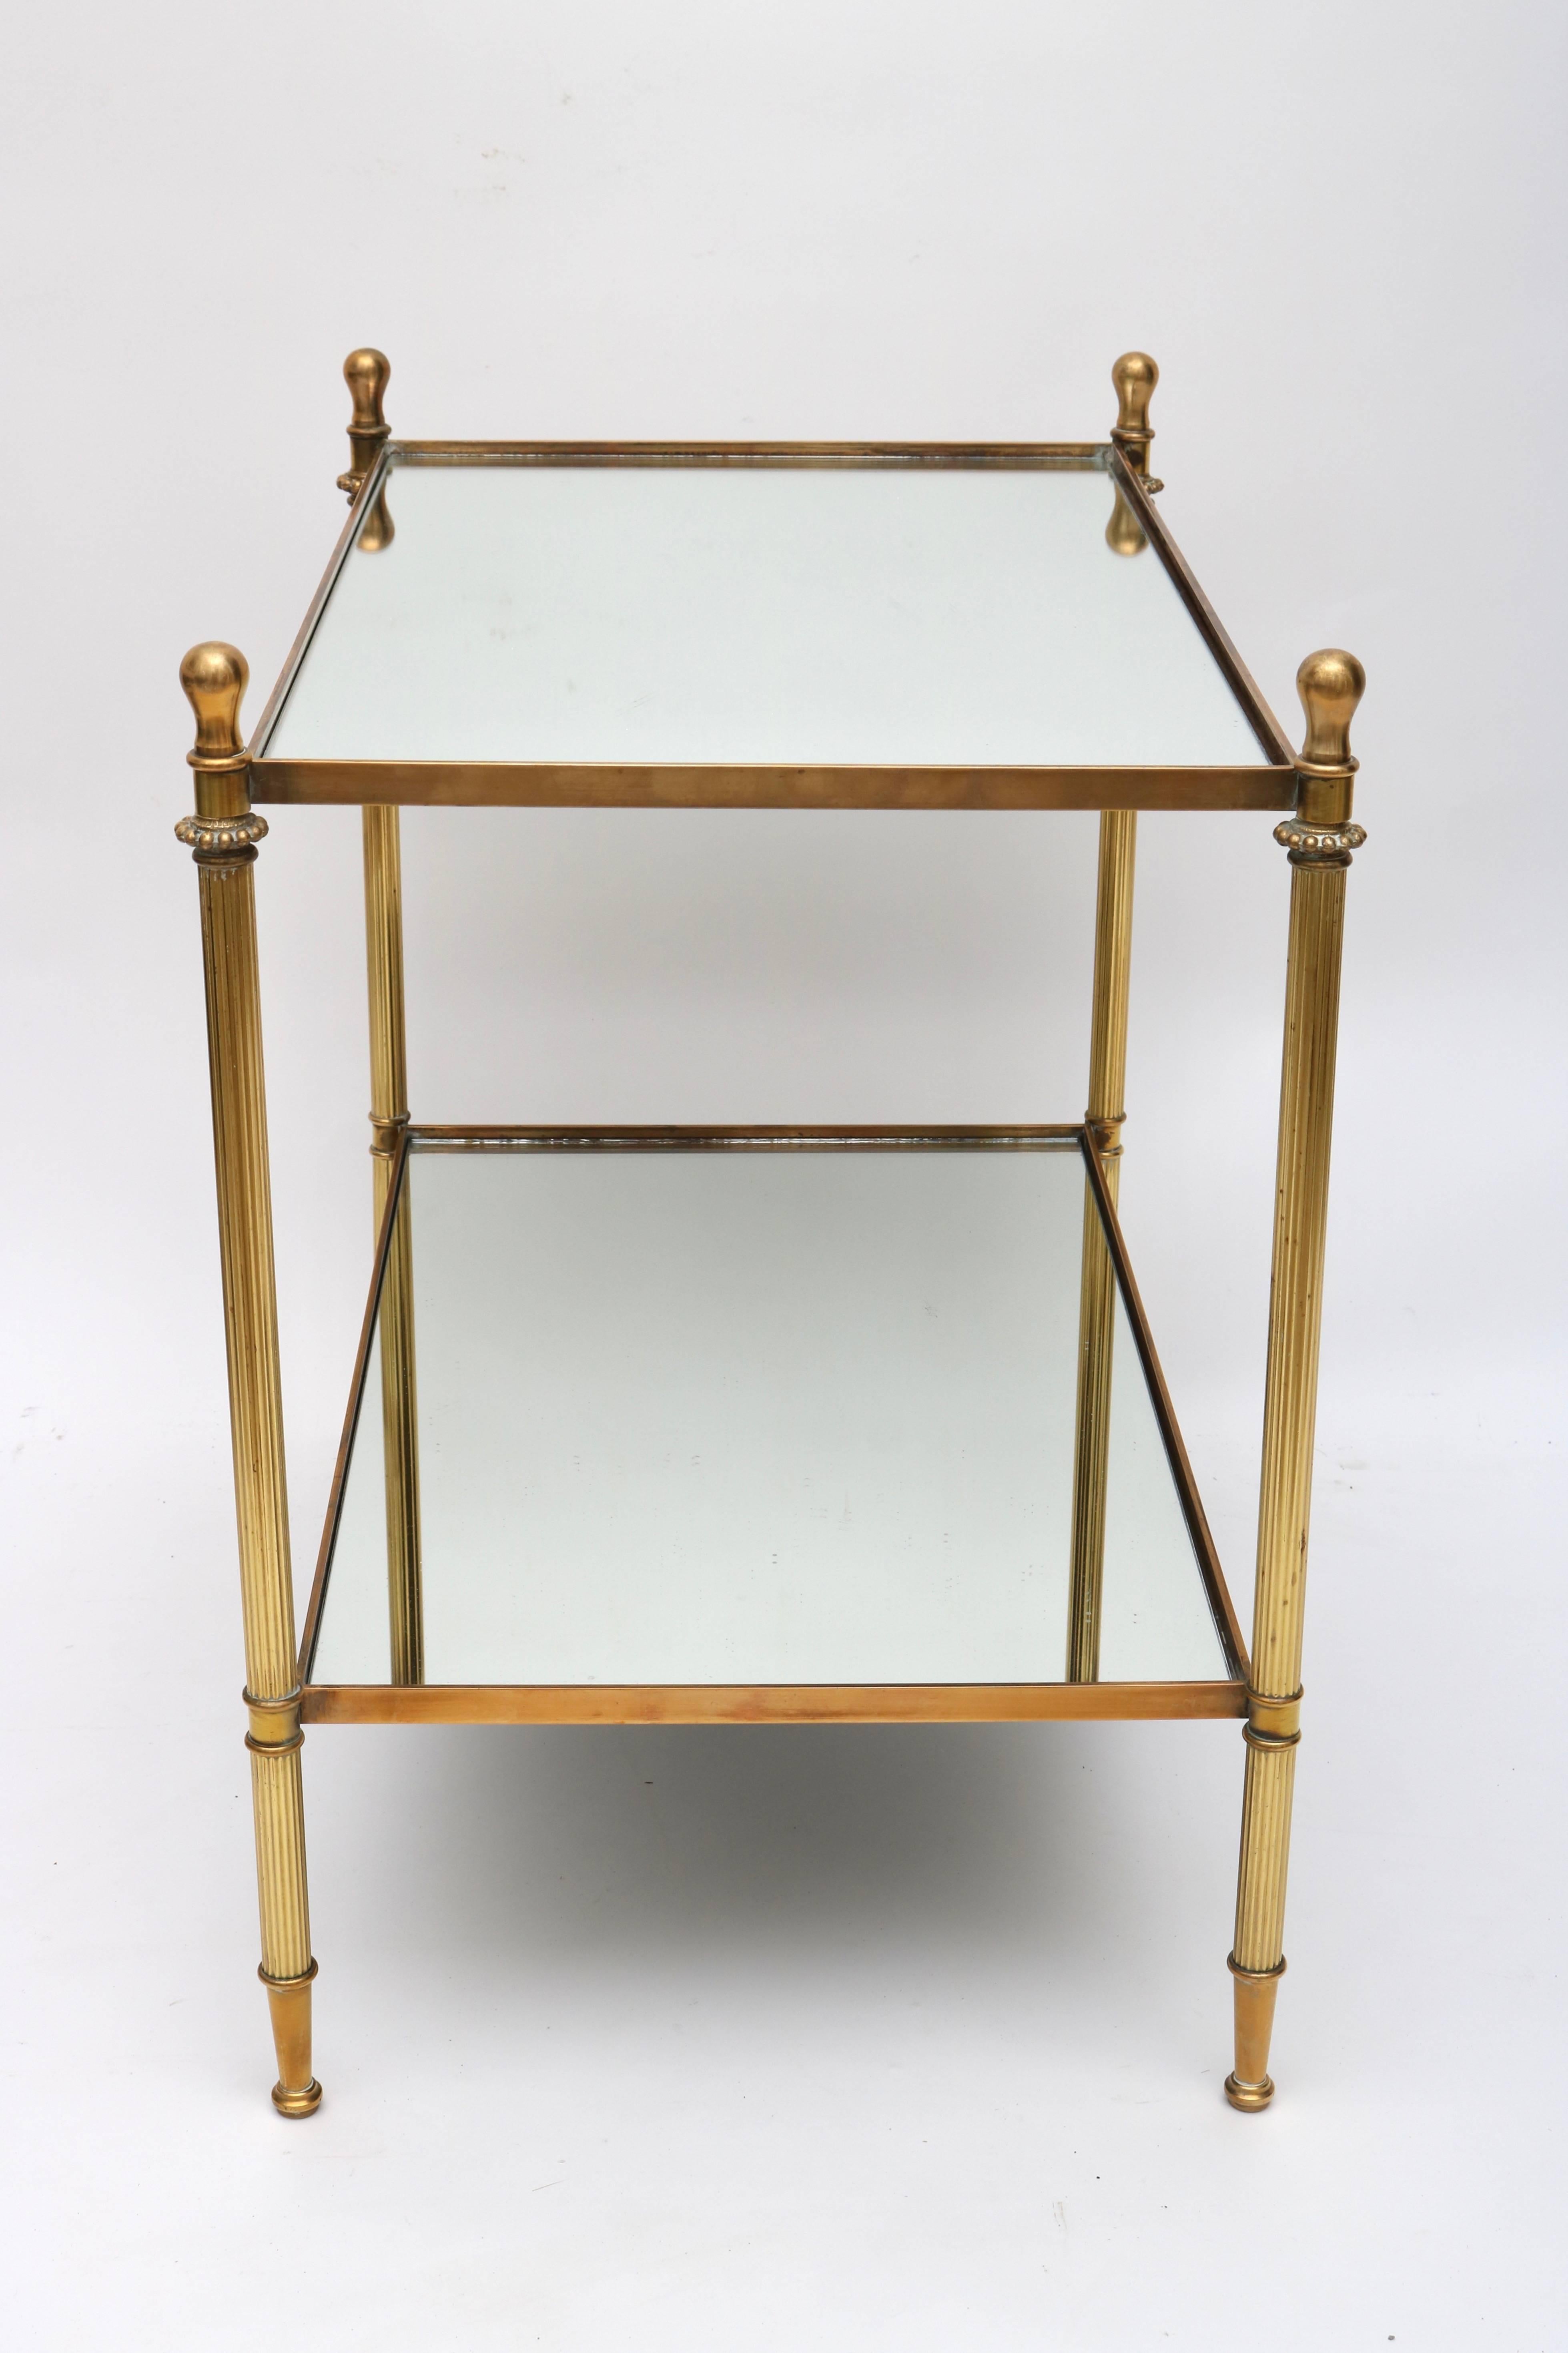 Hollywood Regency Pair of Maison Jansen Style Side Tables in Brass and Glass, circa 1930s